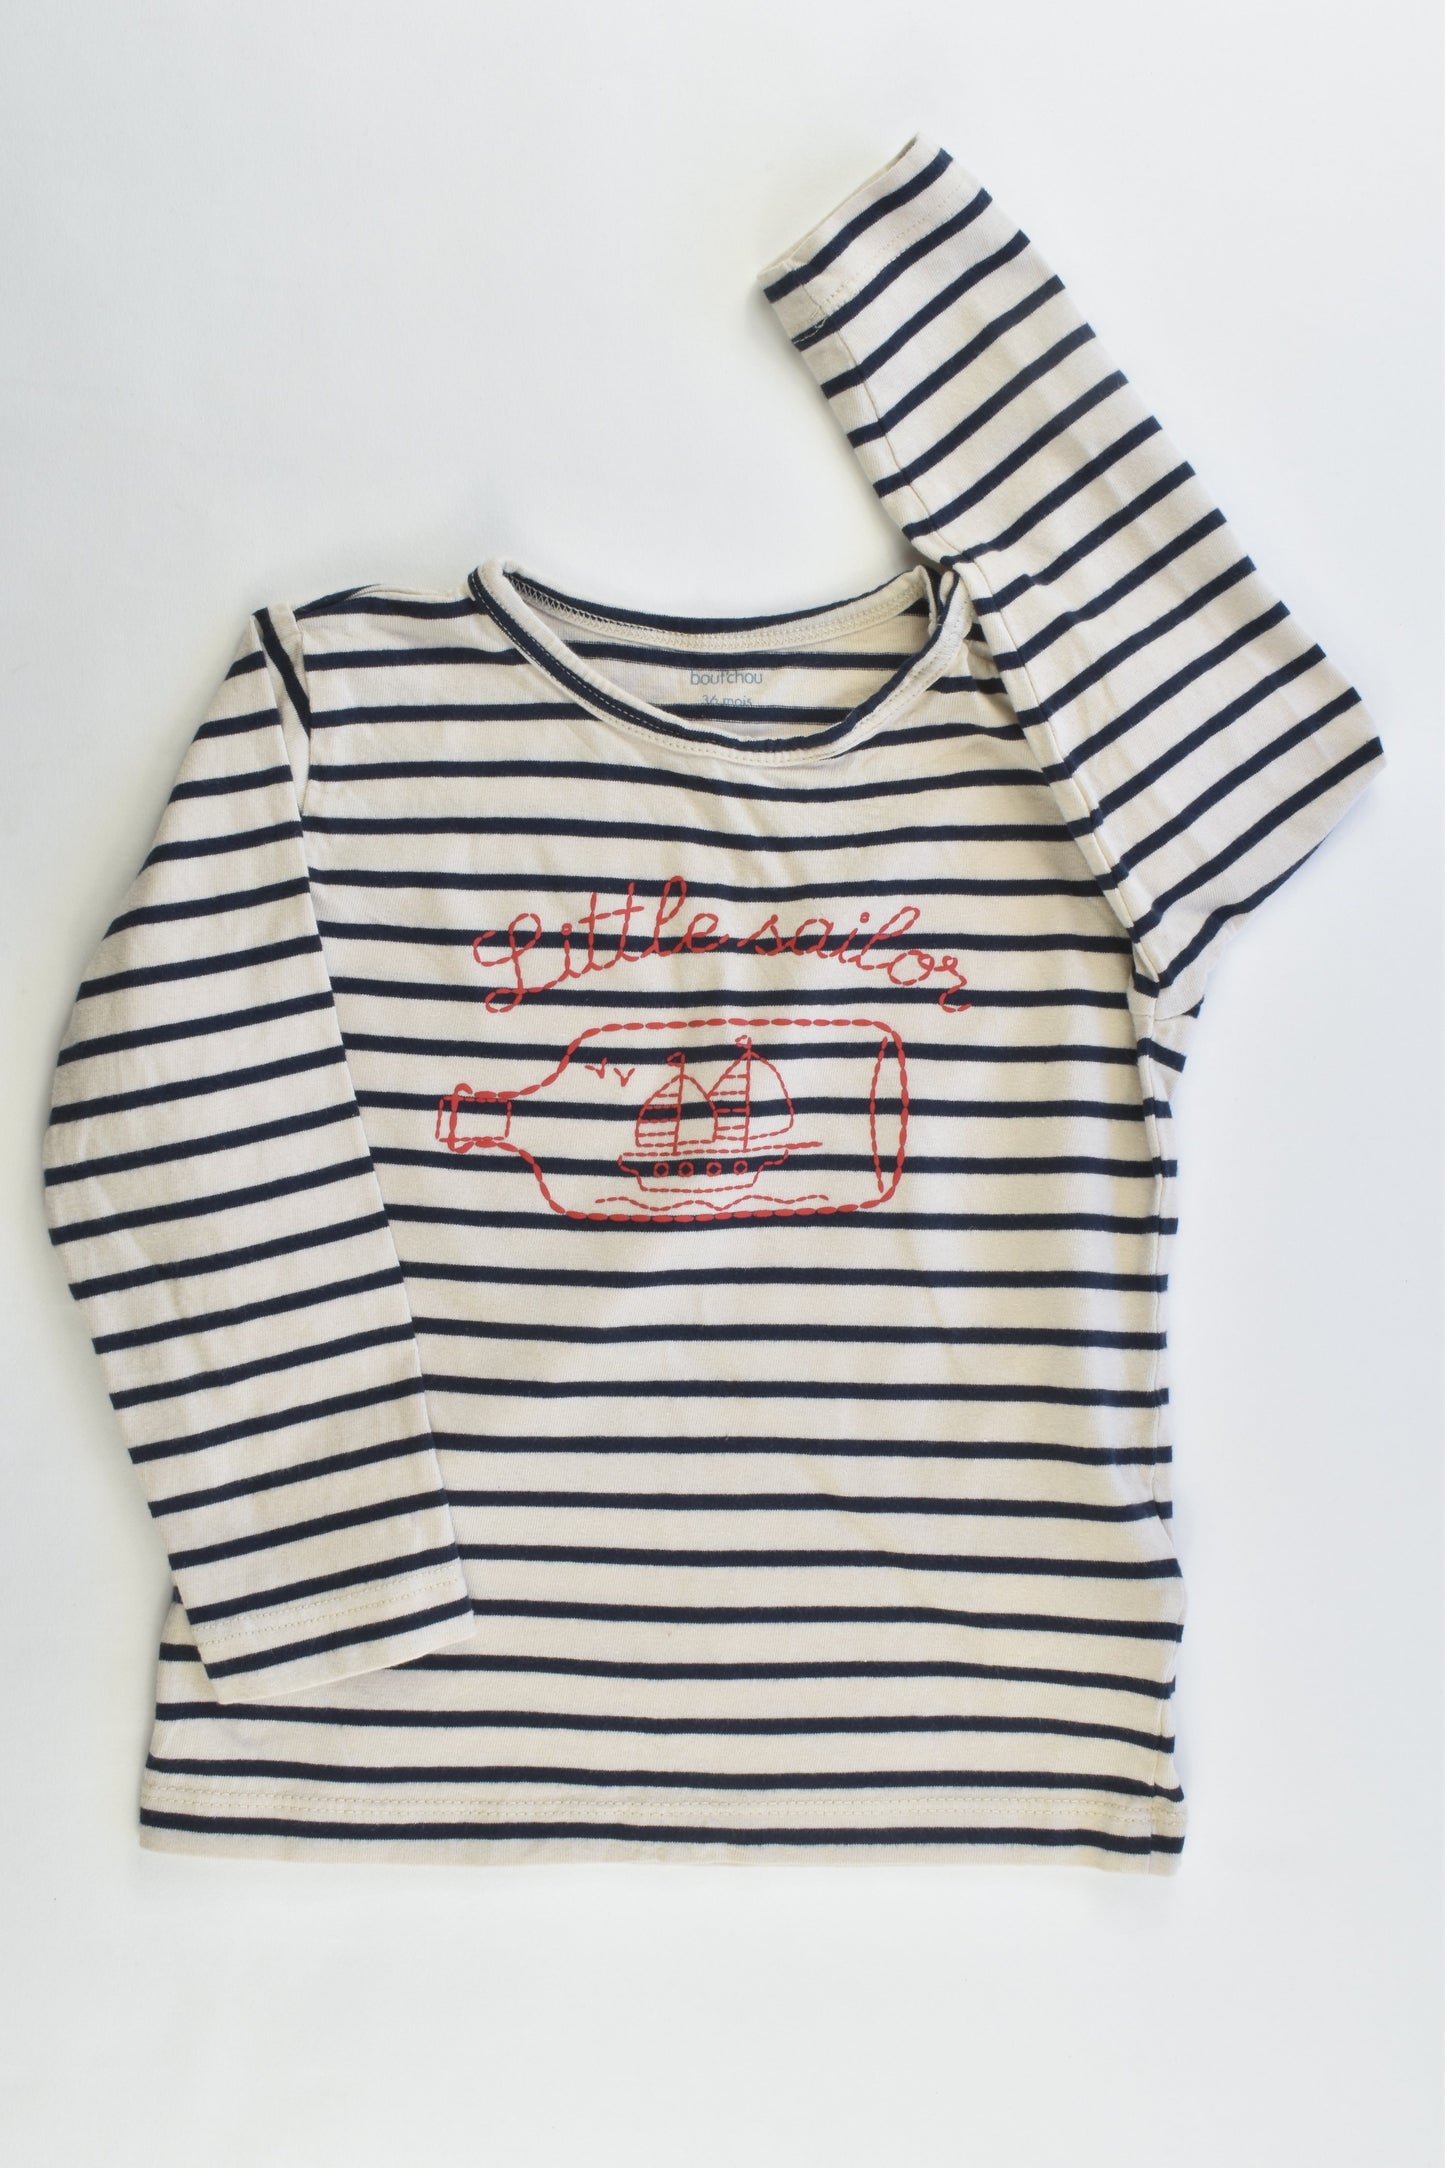 NEW Bout'Chou (France) Size 36 months (3) Striped "Little Sailor" Top